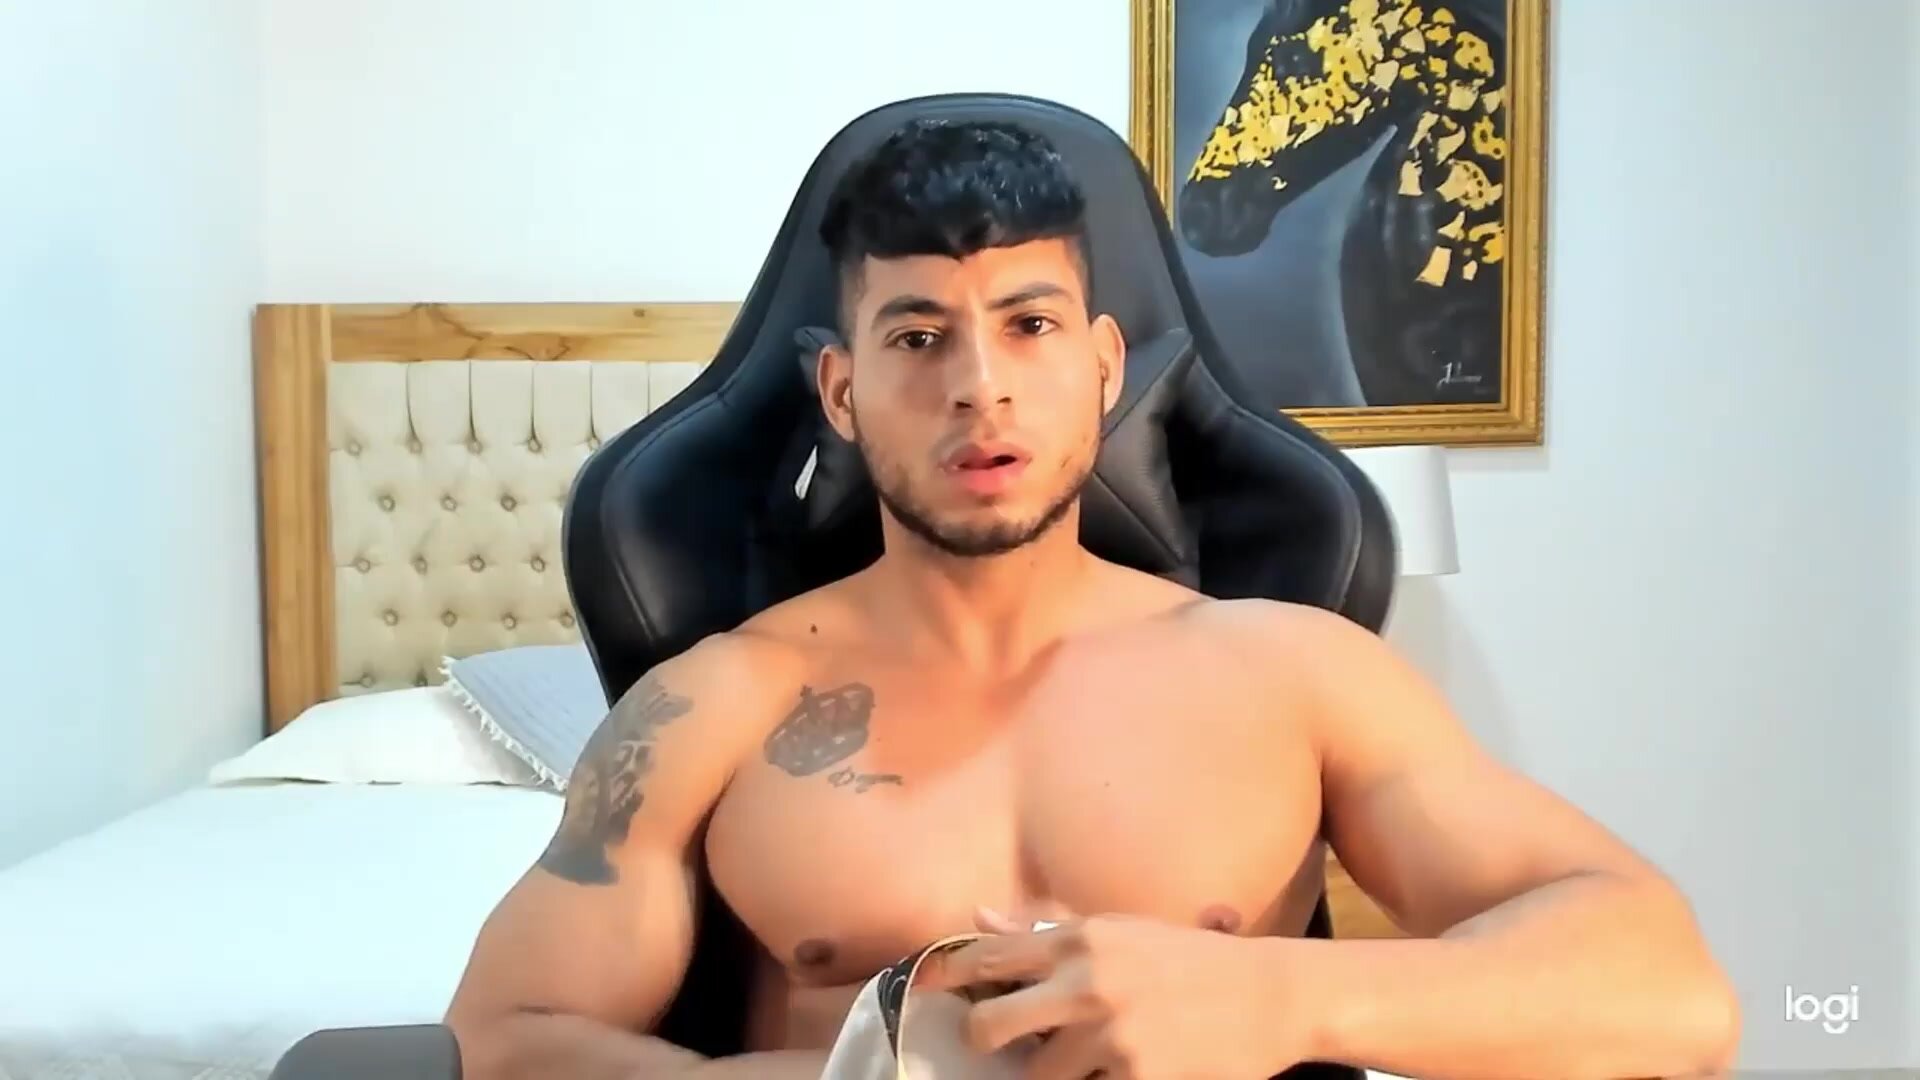 Muslce colombian boy showing his big dick